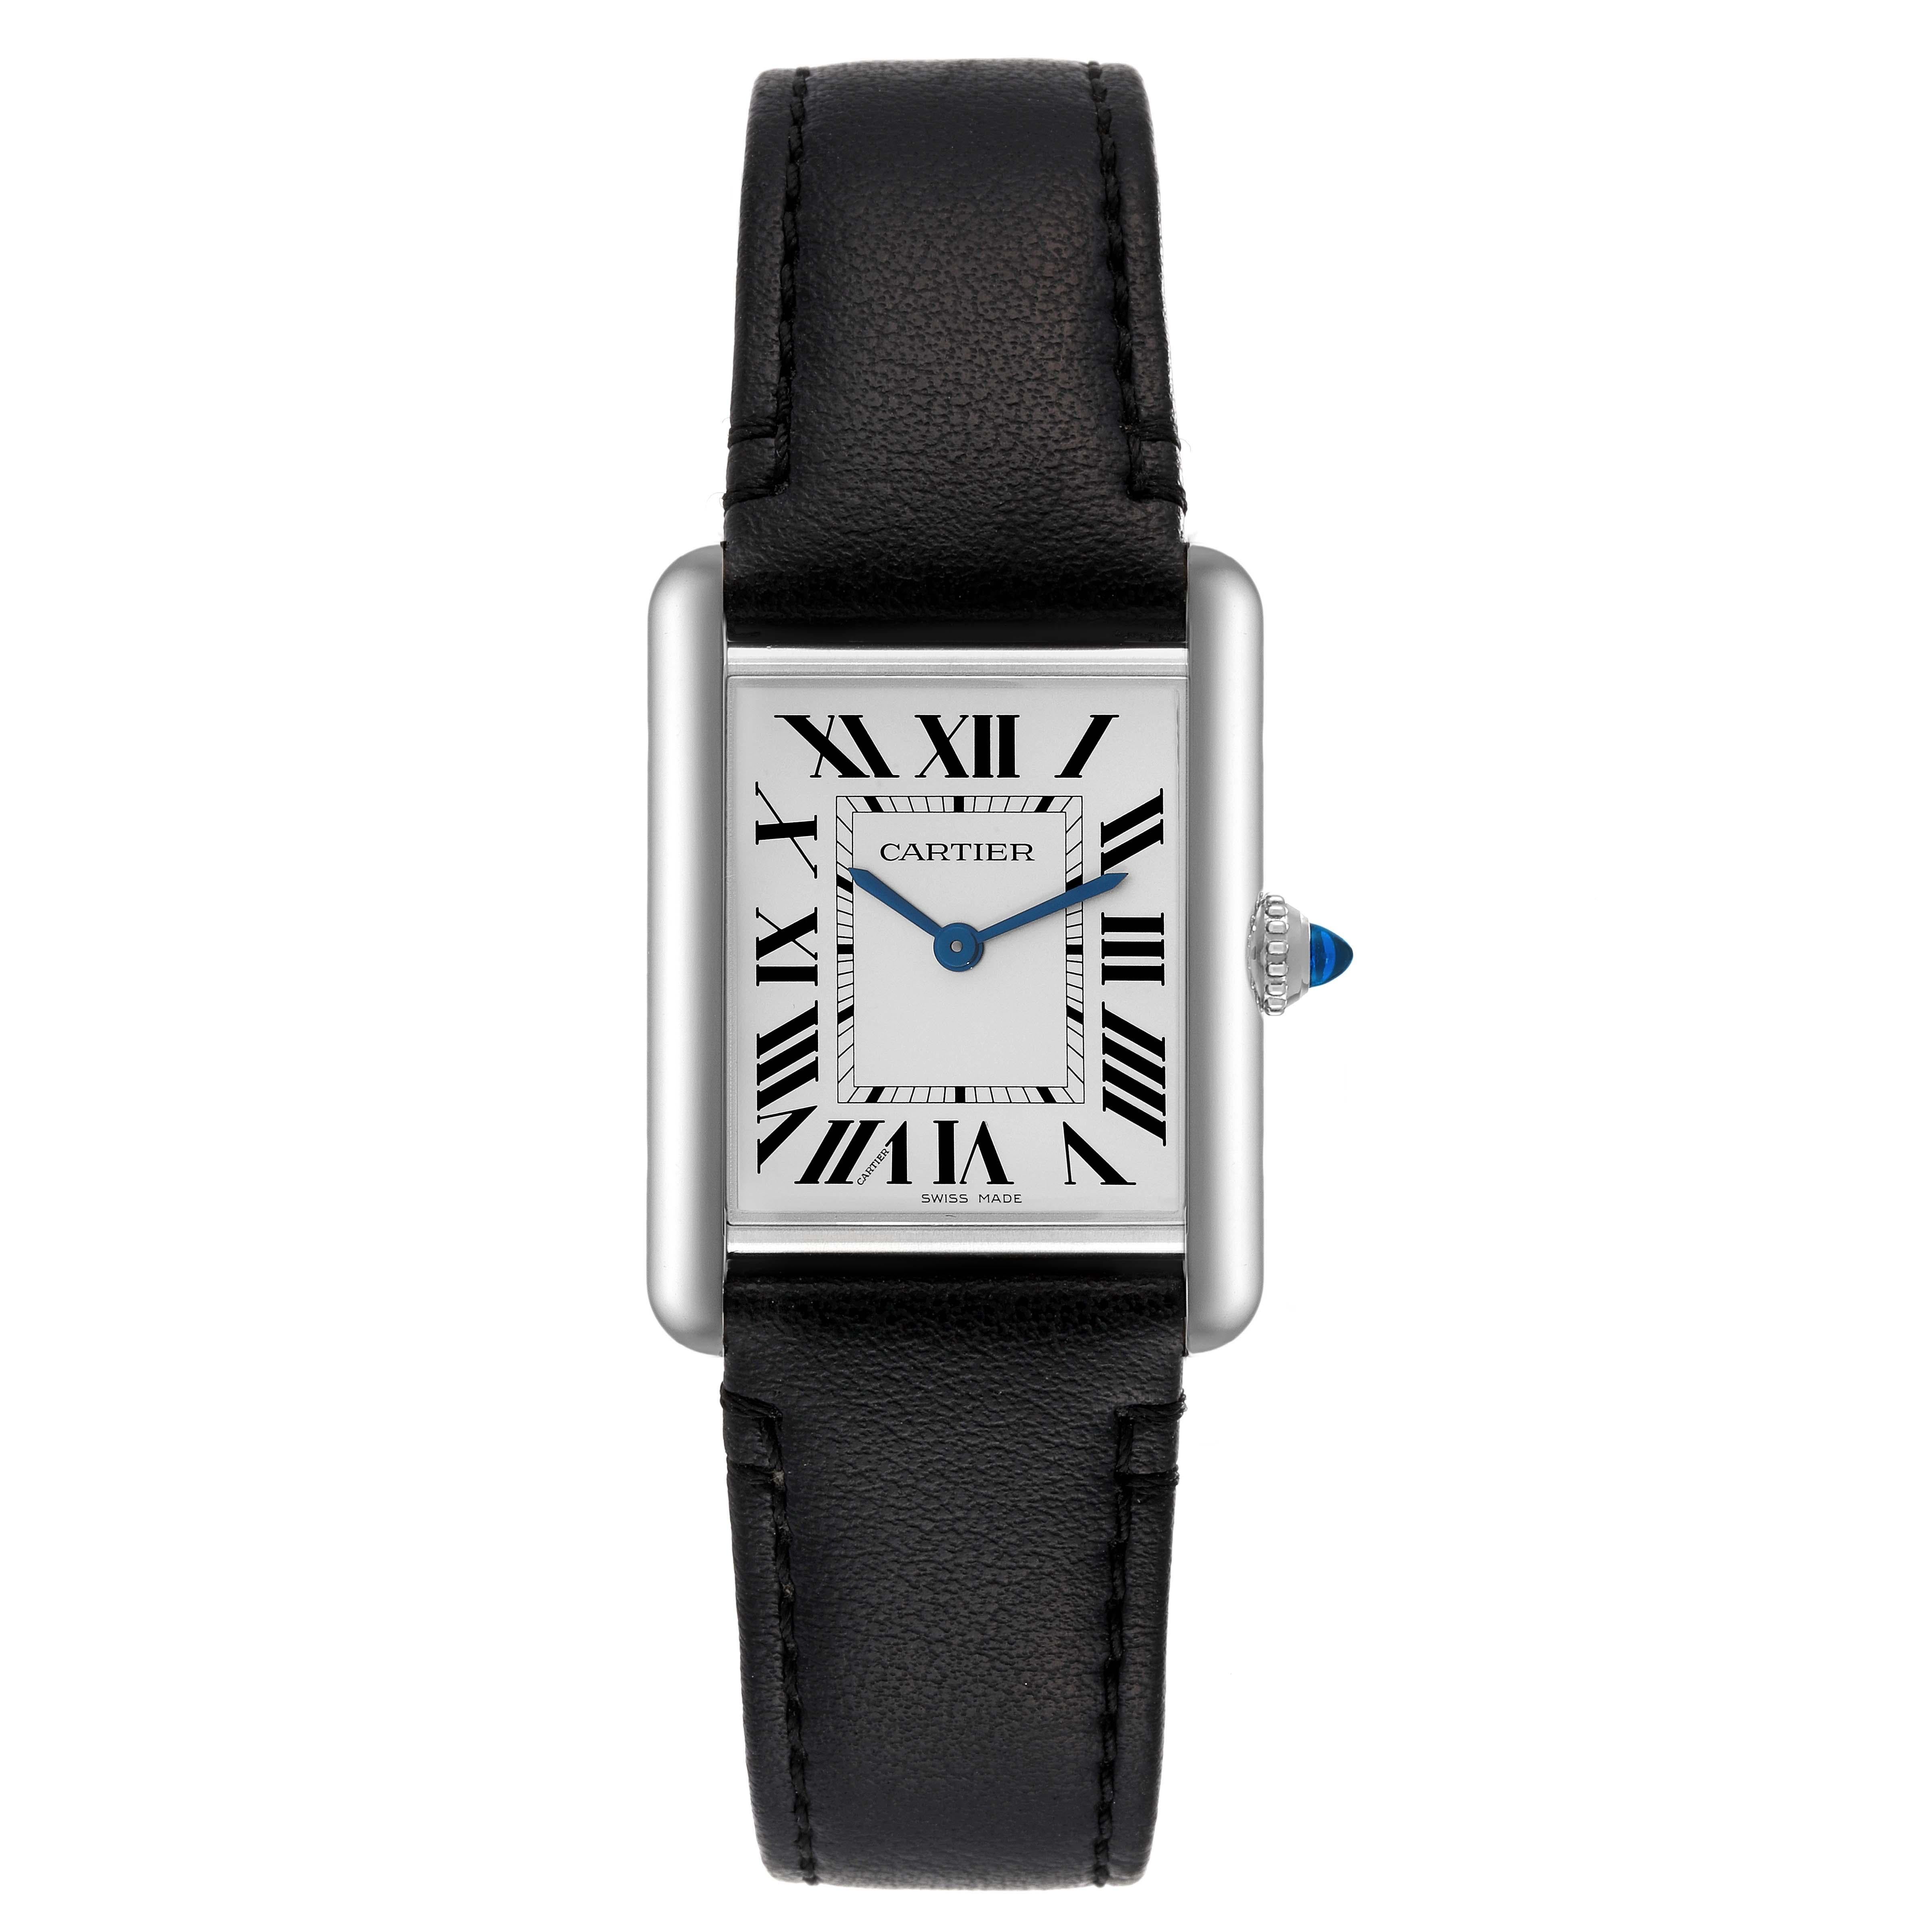 Cartier Tank Must Large SolarBeat Steel Mens Watch WSTA0059 Box Card. SolarBeat photovoltaic movement. Stainless steel case 33.7 x 25.5 mm. Circular grained crown set with a blue spinel cabochon. . Scratch resistant sapphire crystal. Silvered